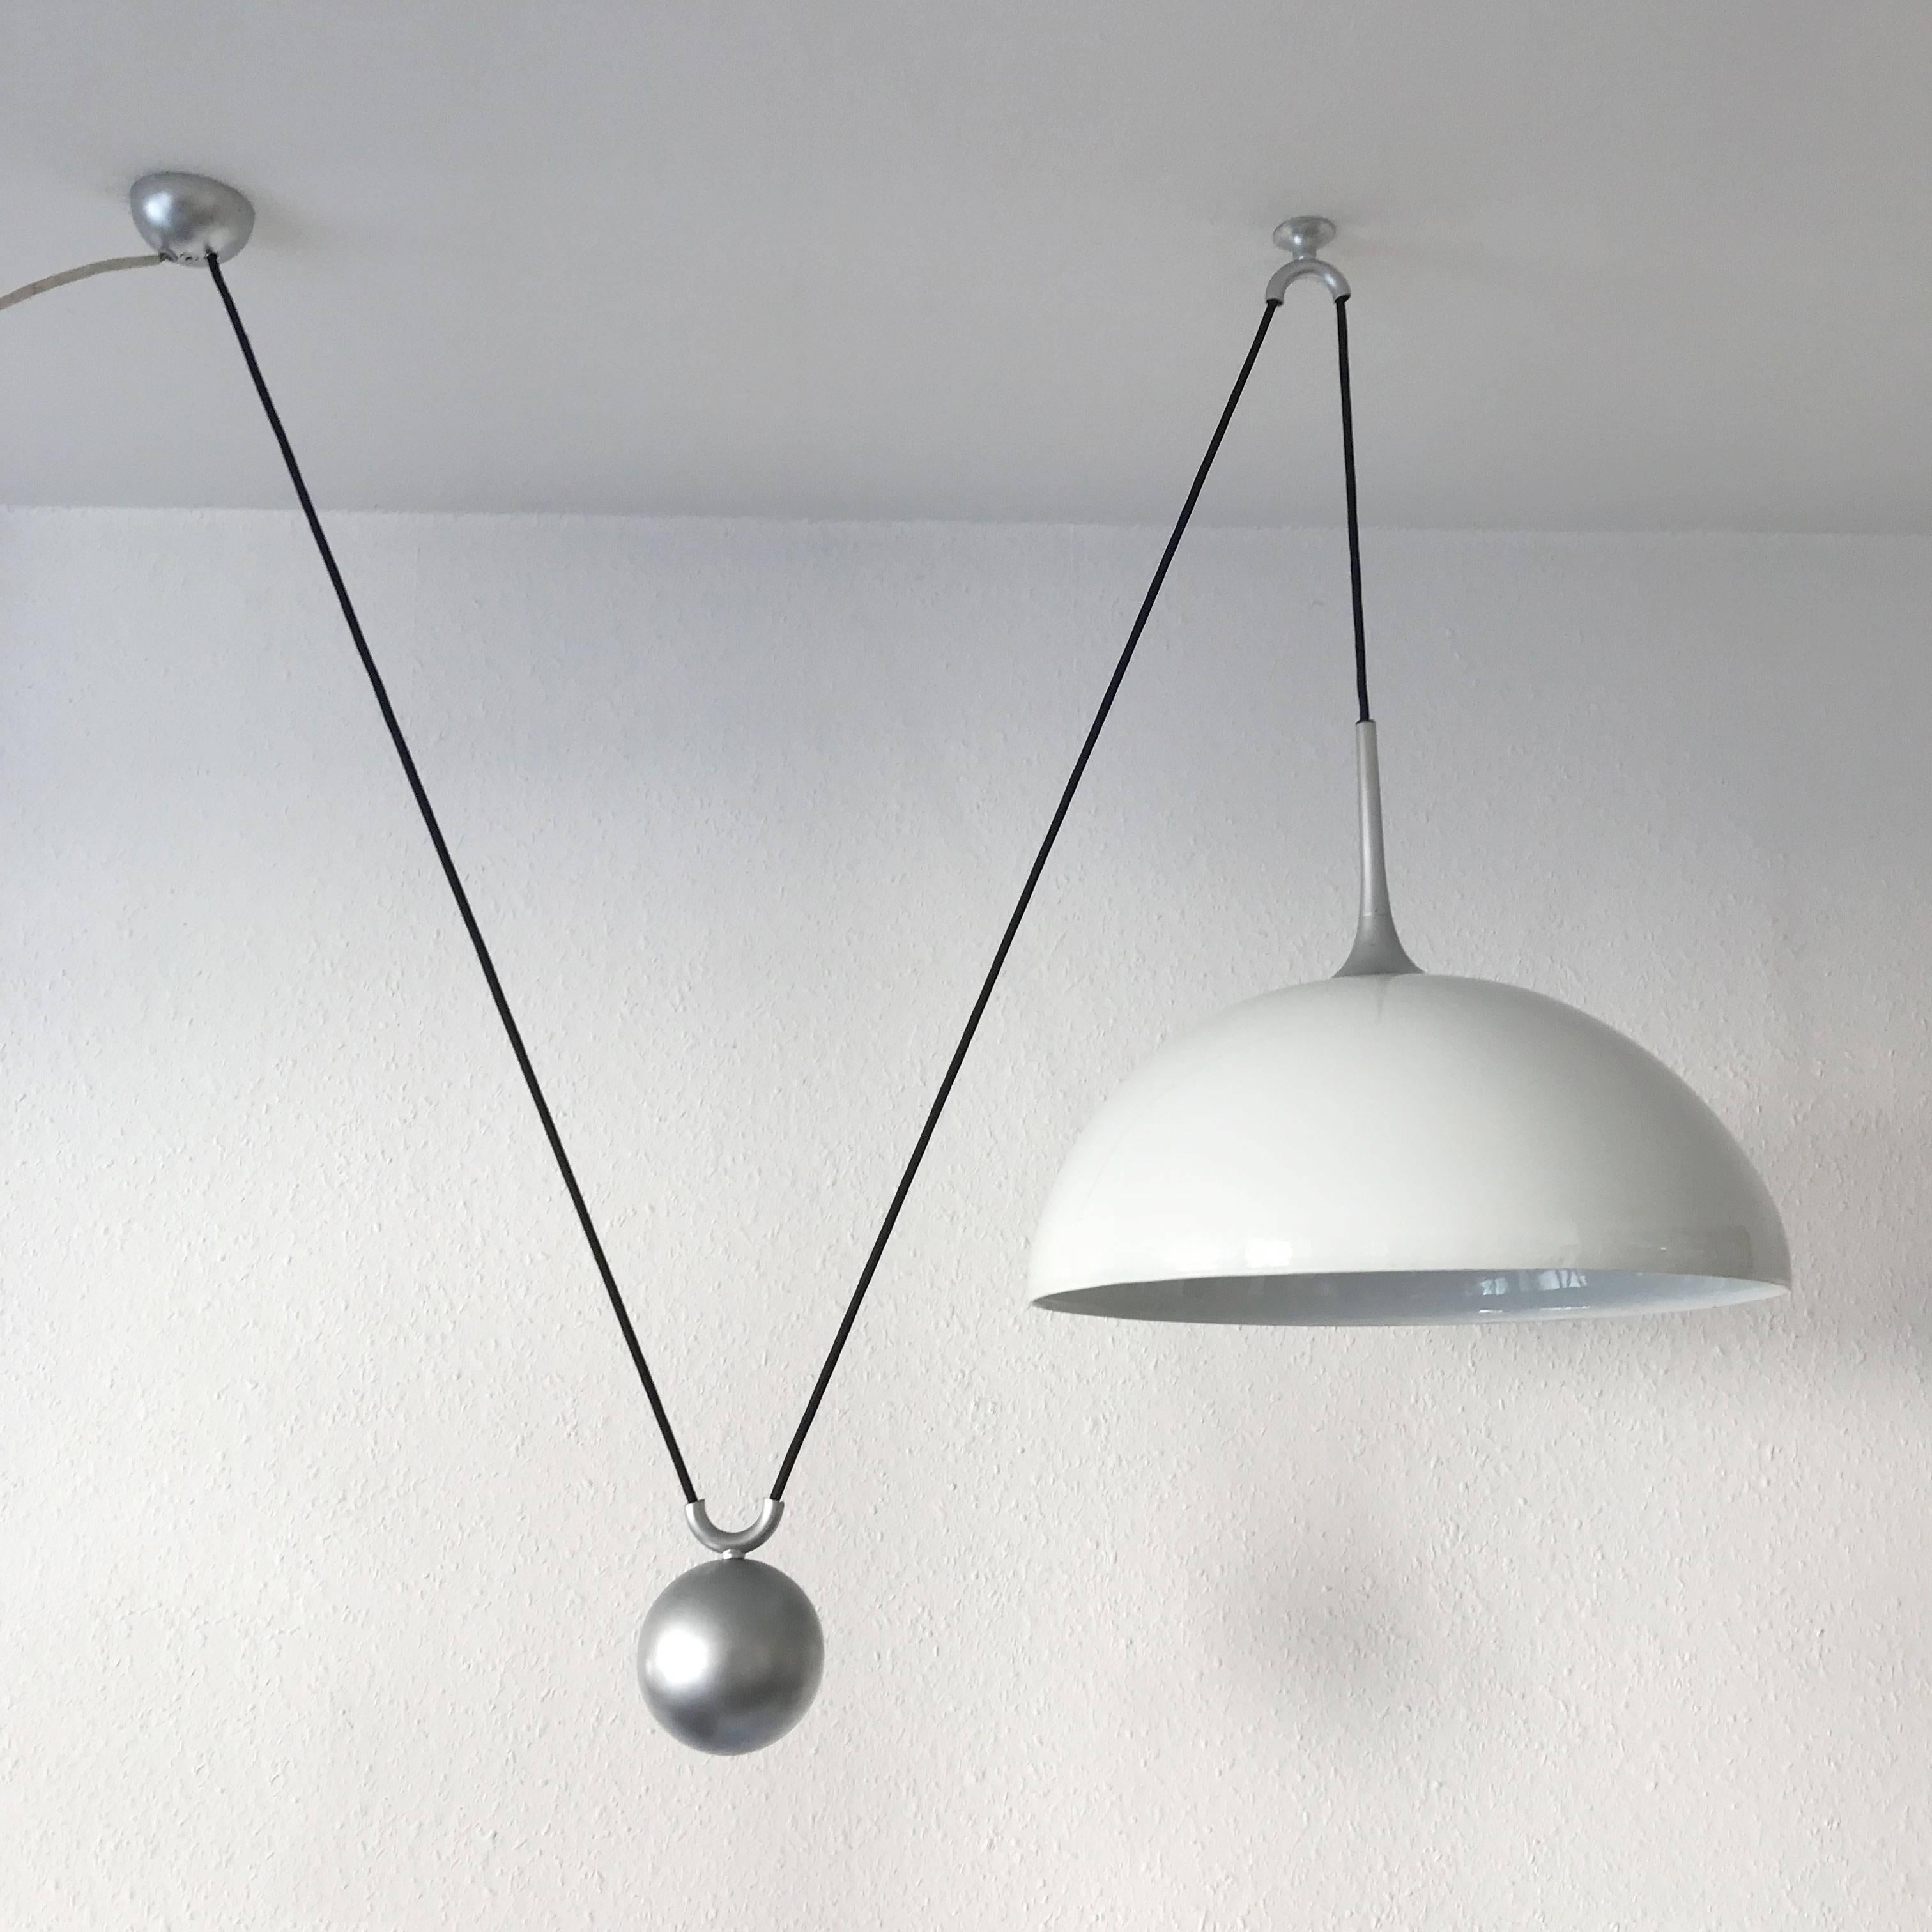 Late 20th Century Counterweight Pendant Lamp by Florian Schulz